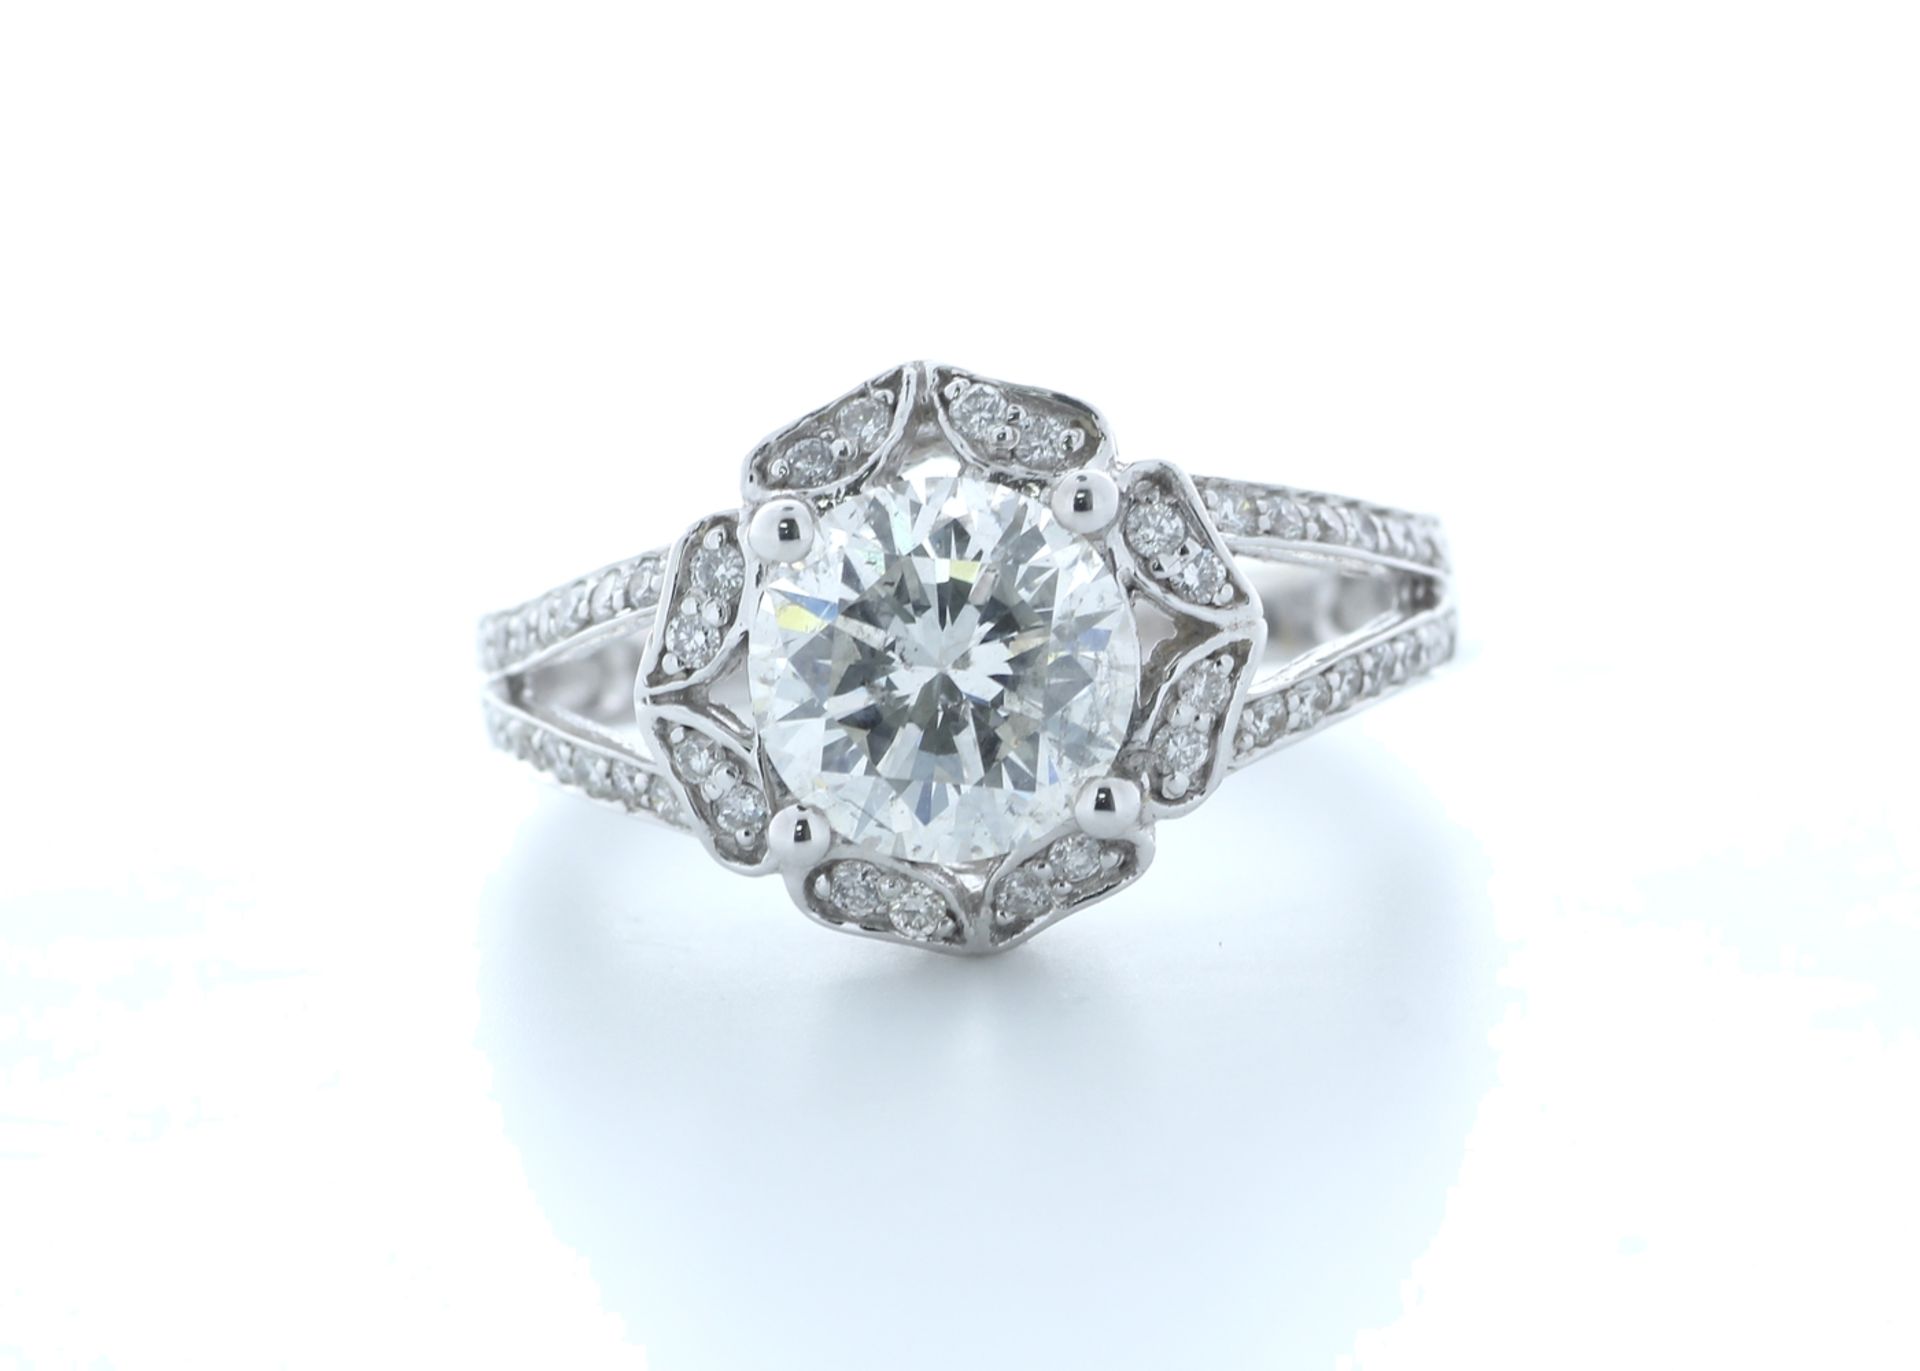 18ct White Gold Single Stone With Halo Setting Ring 2.06 (1.66) Carats - Valued by IDI £36,000.